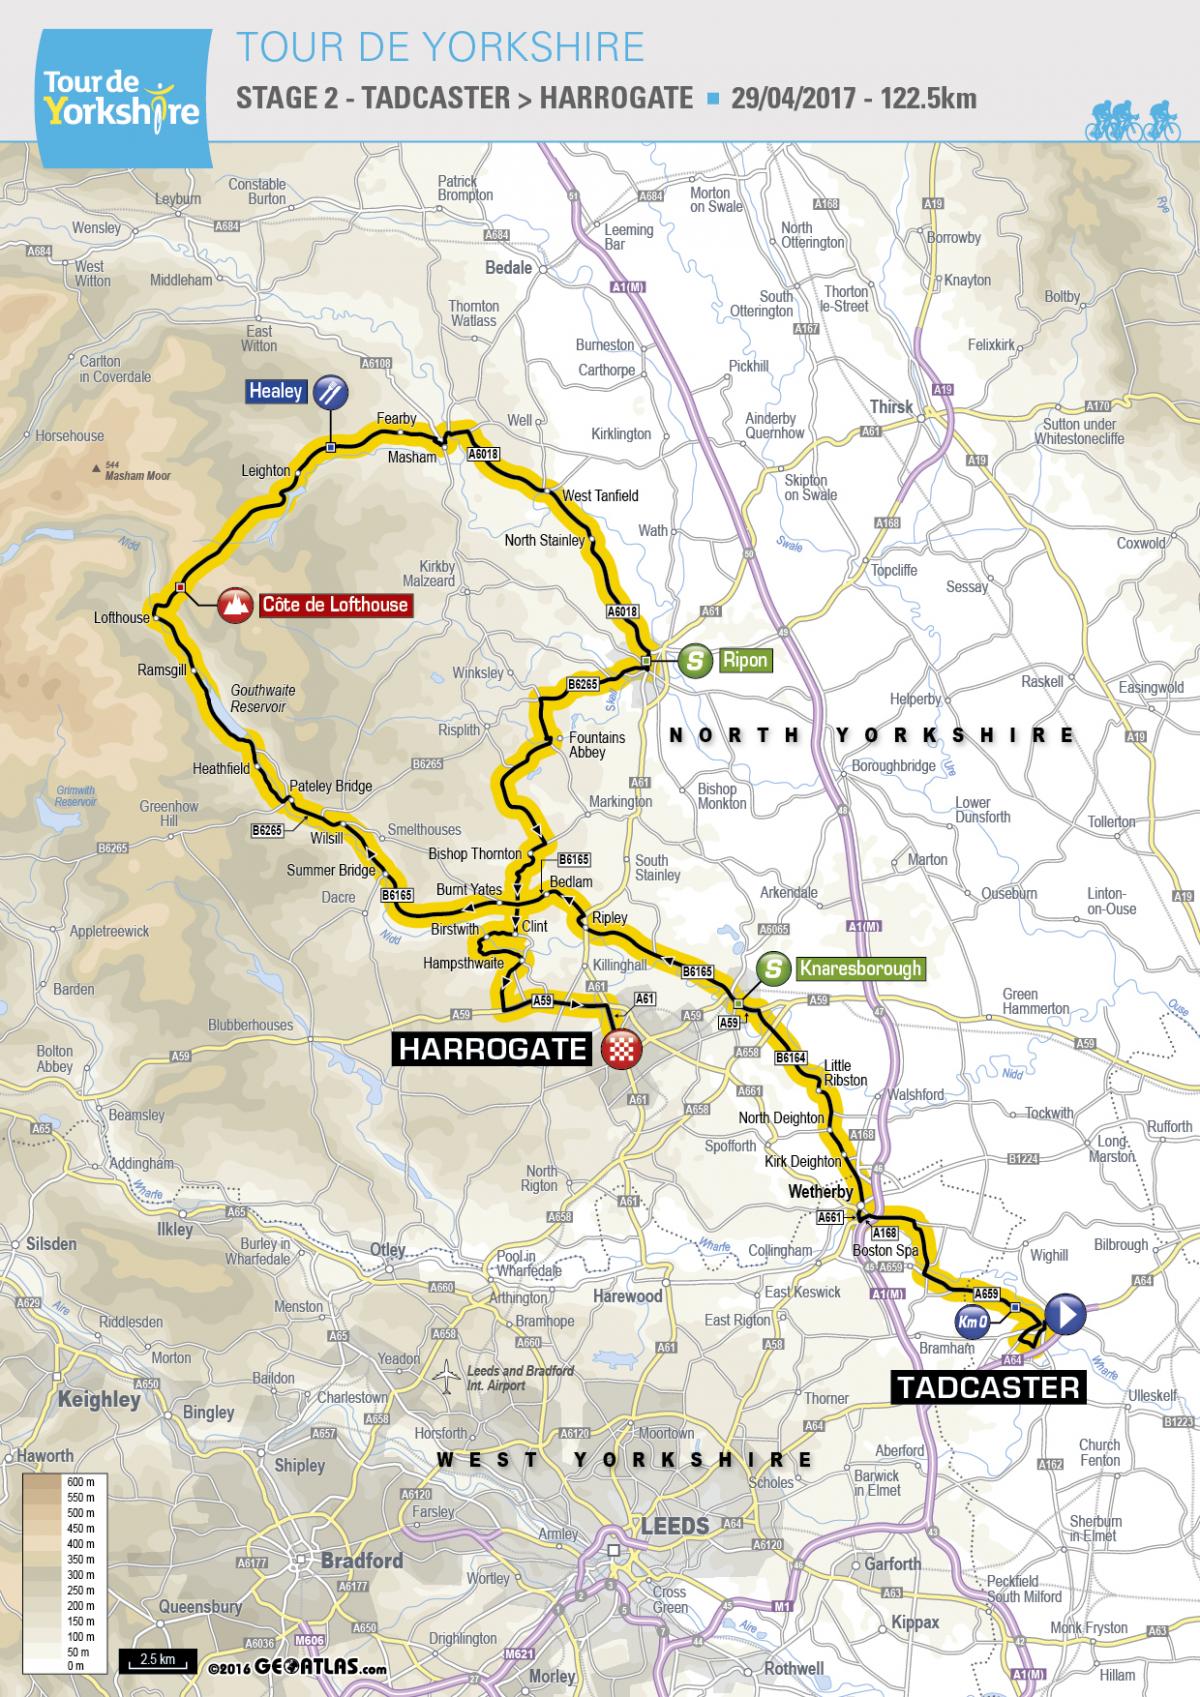 The full route for Stage 2 of the Tour de Yorkshire 2017